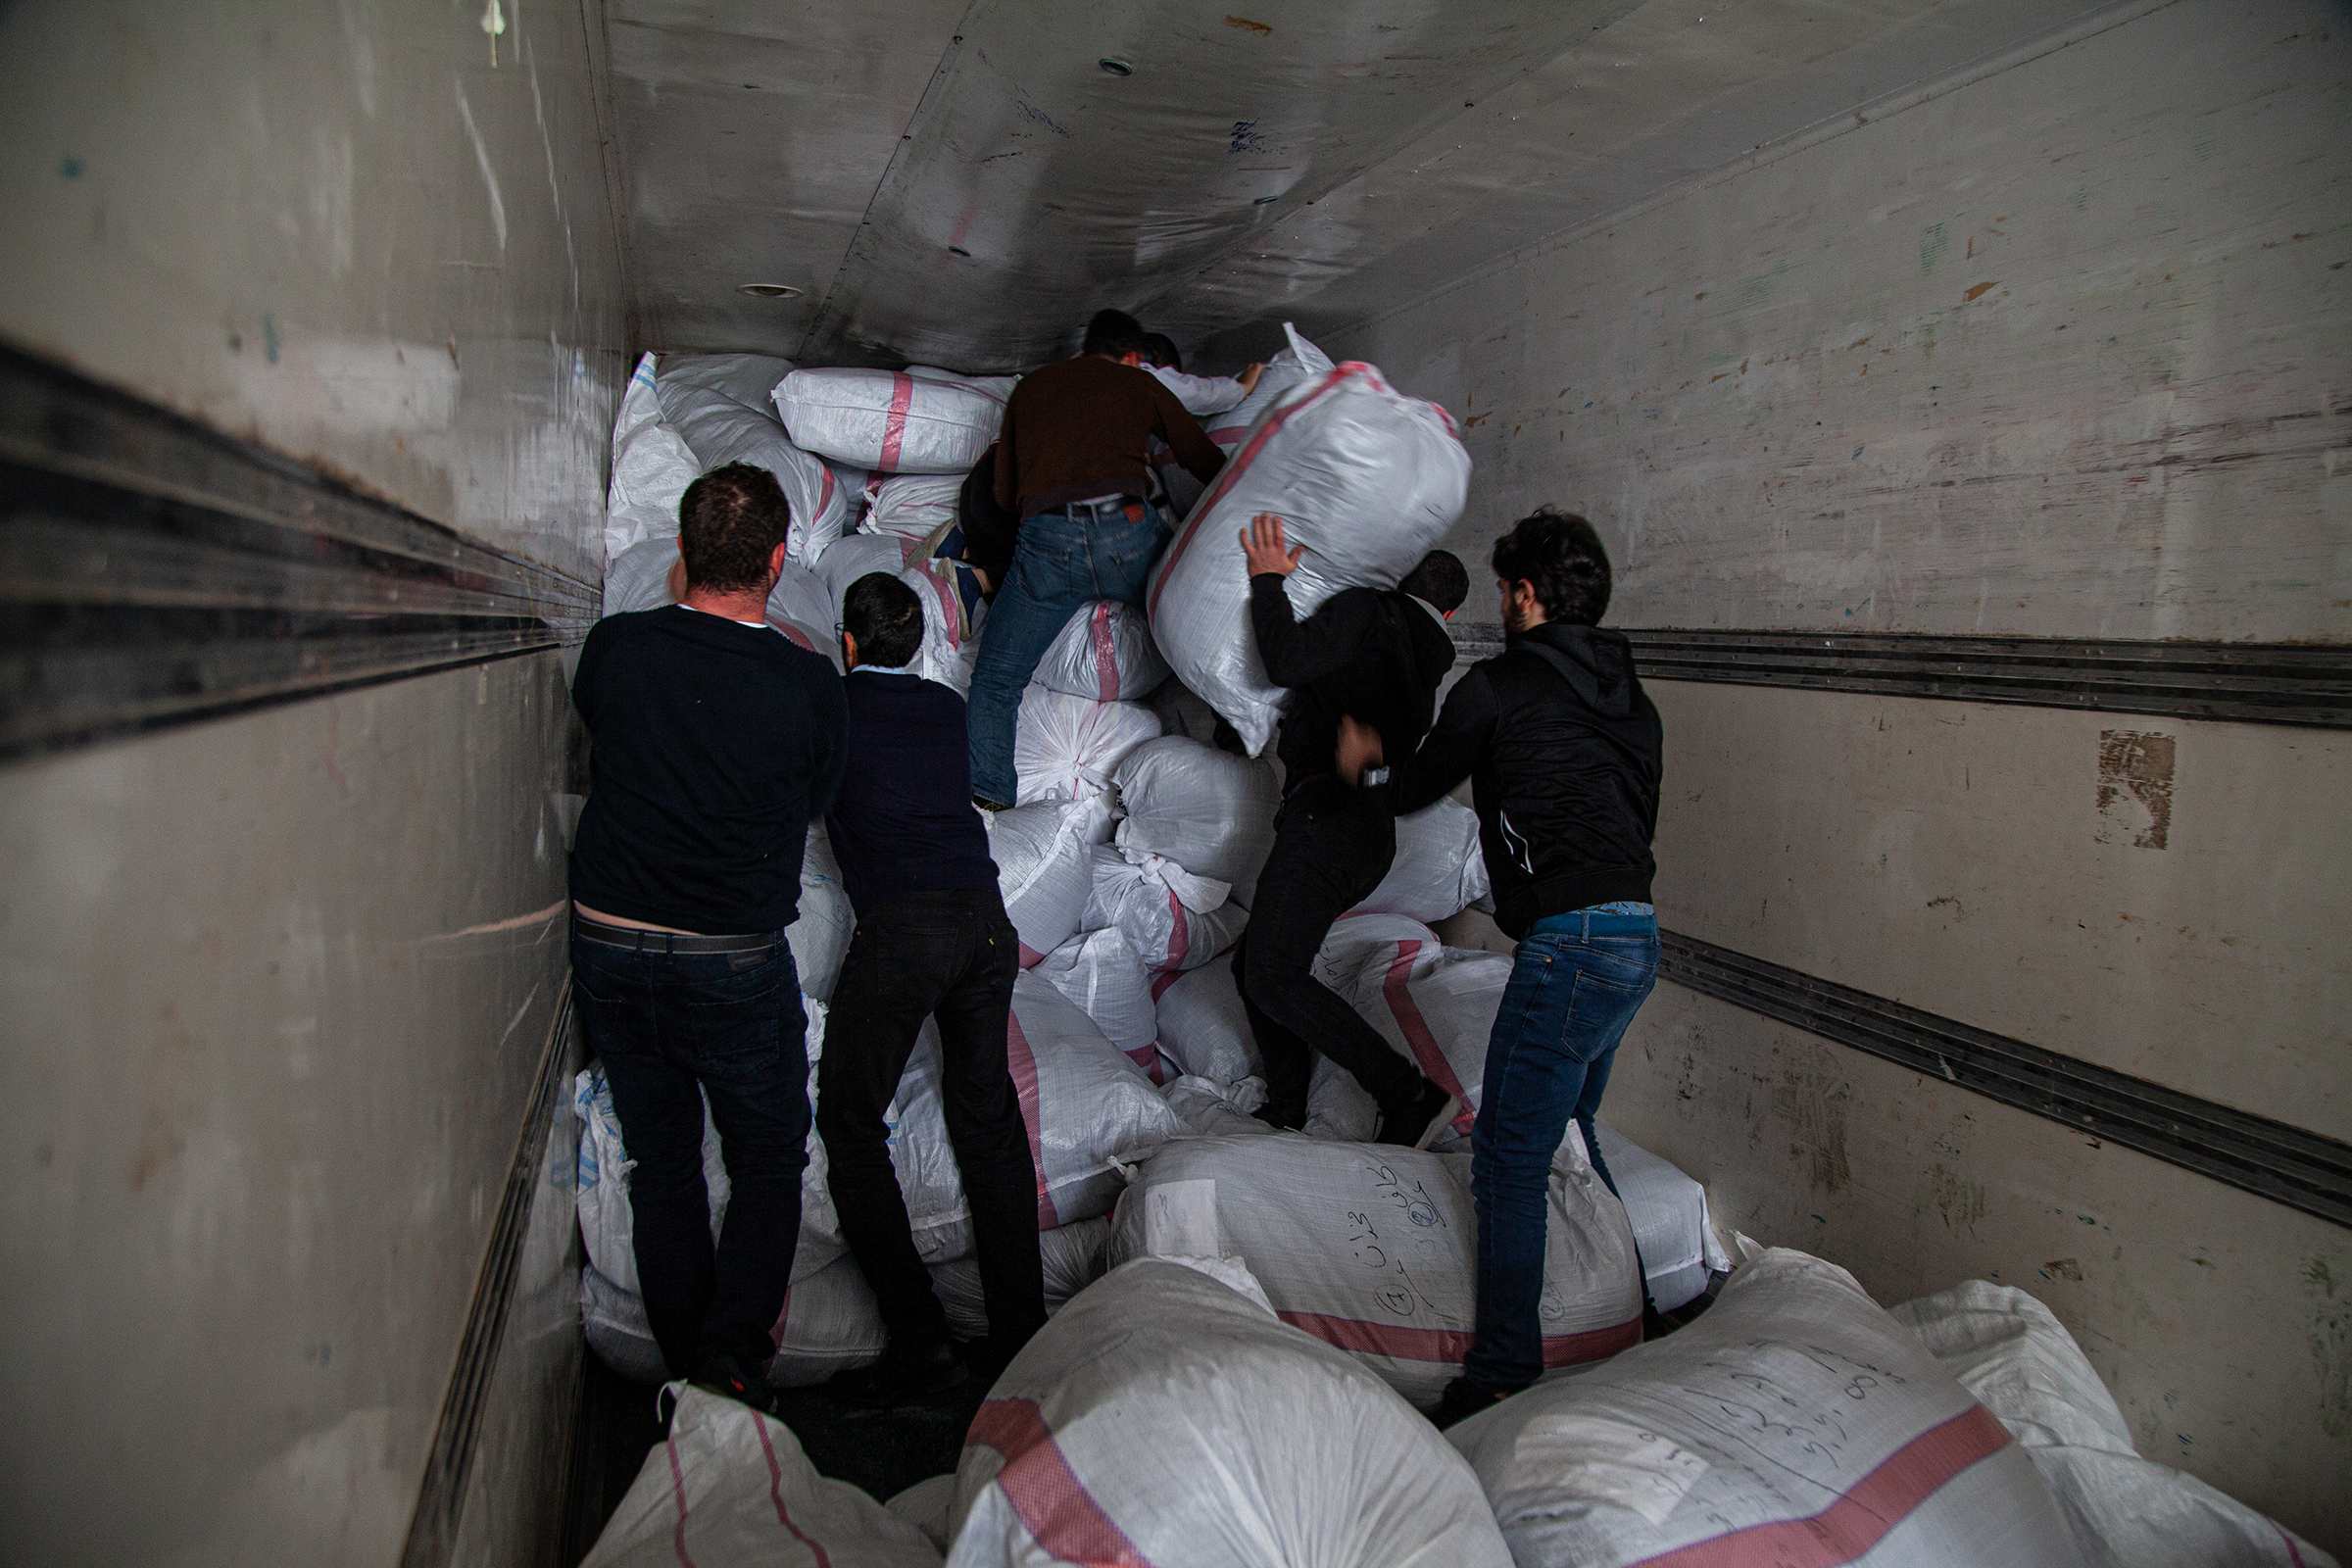 Men load sacks of humanitarian items into a truck in Gaziantep, Turkey, on Jan. 5, 2020. The aid was collected for newly displaced Syrians from Idlib. (Ahmad Al-islam—SOPA Images/Sipa USA)